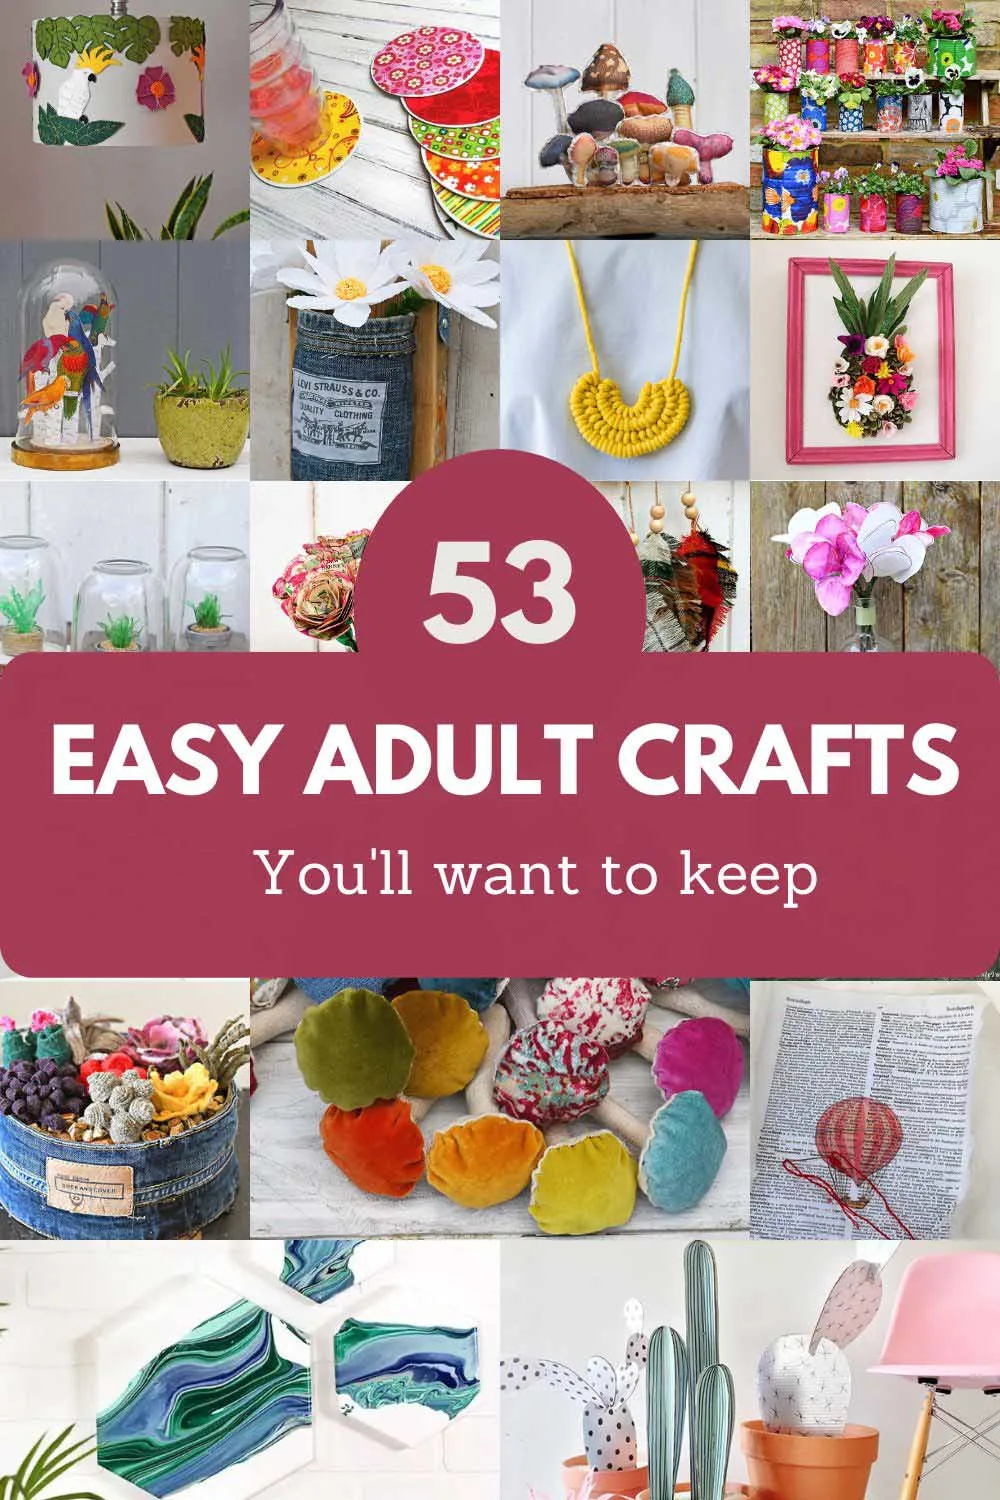 25 Fun and Easy Crafts For Adults  Arts and crafts for adults, Easy arts  and crafts, Diy crafts for adults